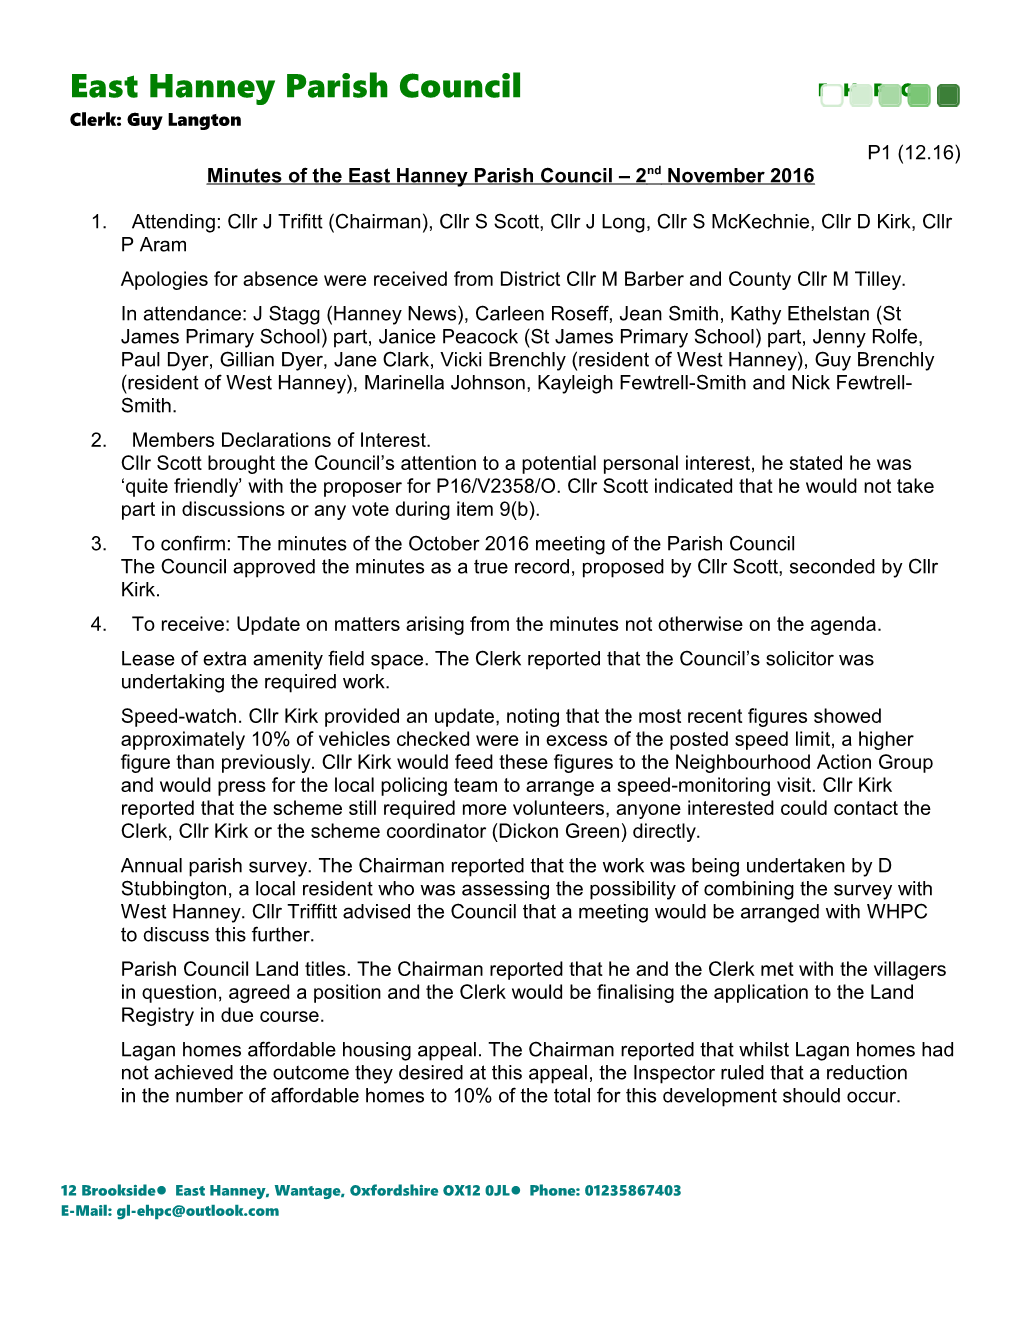 Minutes of the East Hanney Parish Council 2Nd November 2016